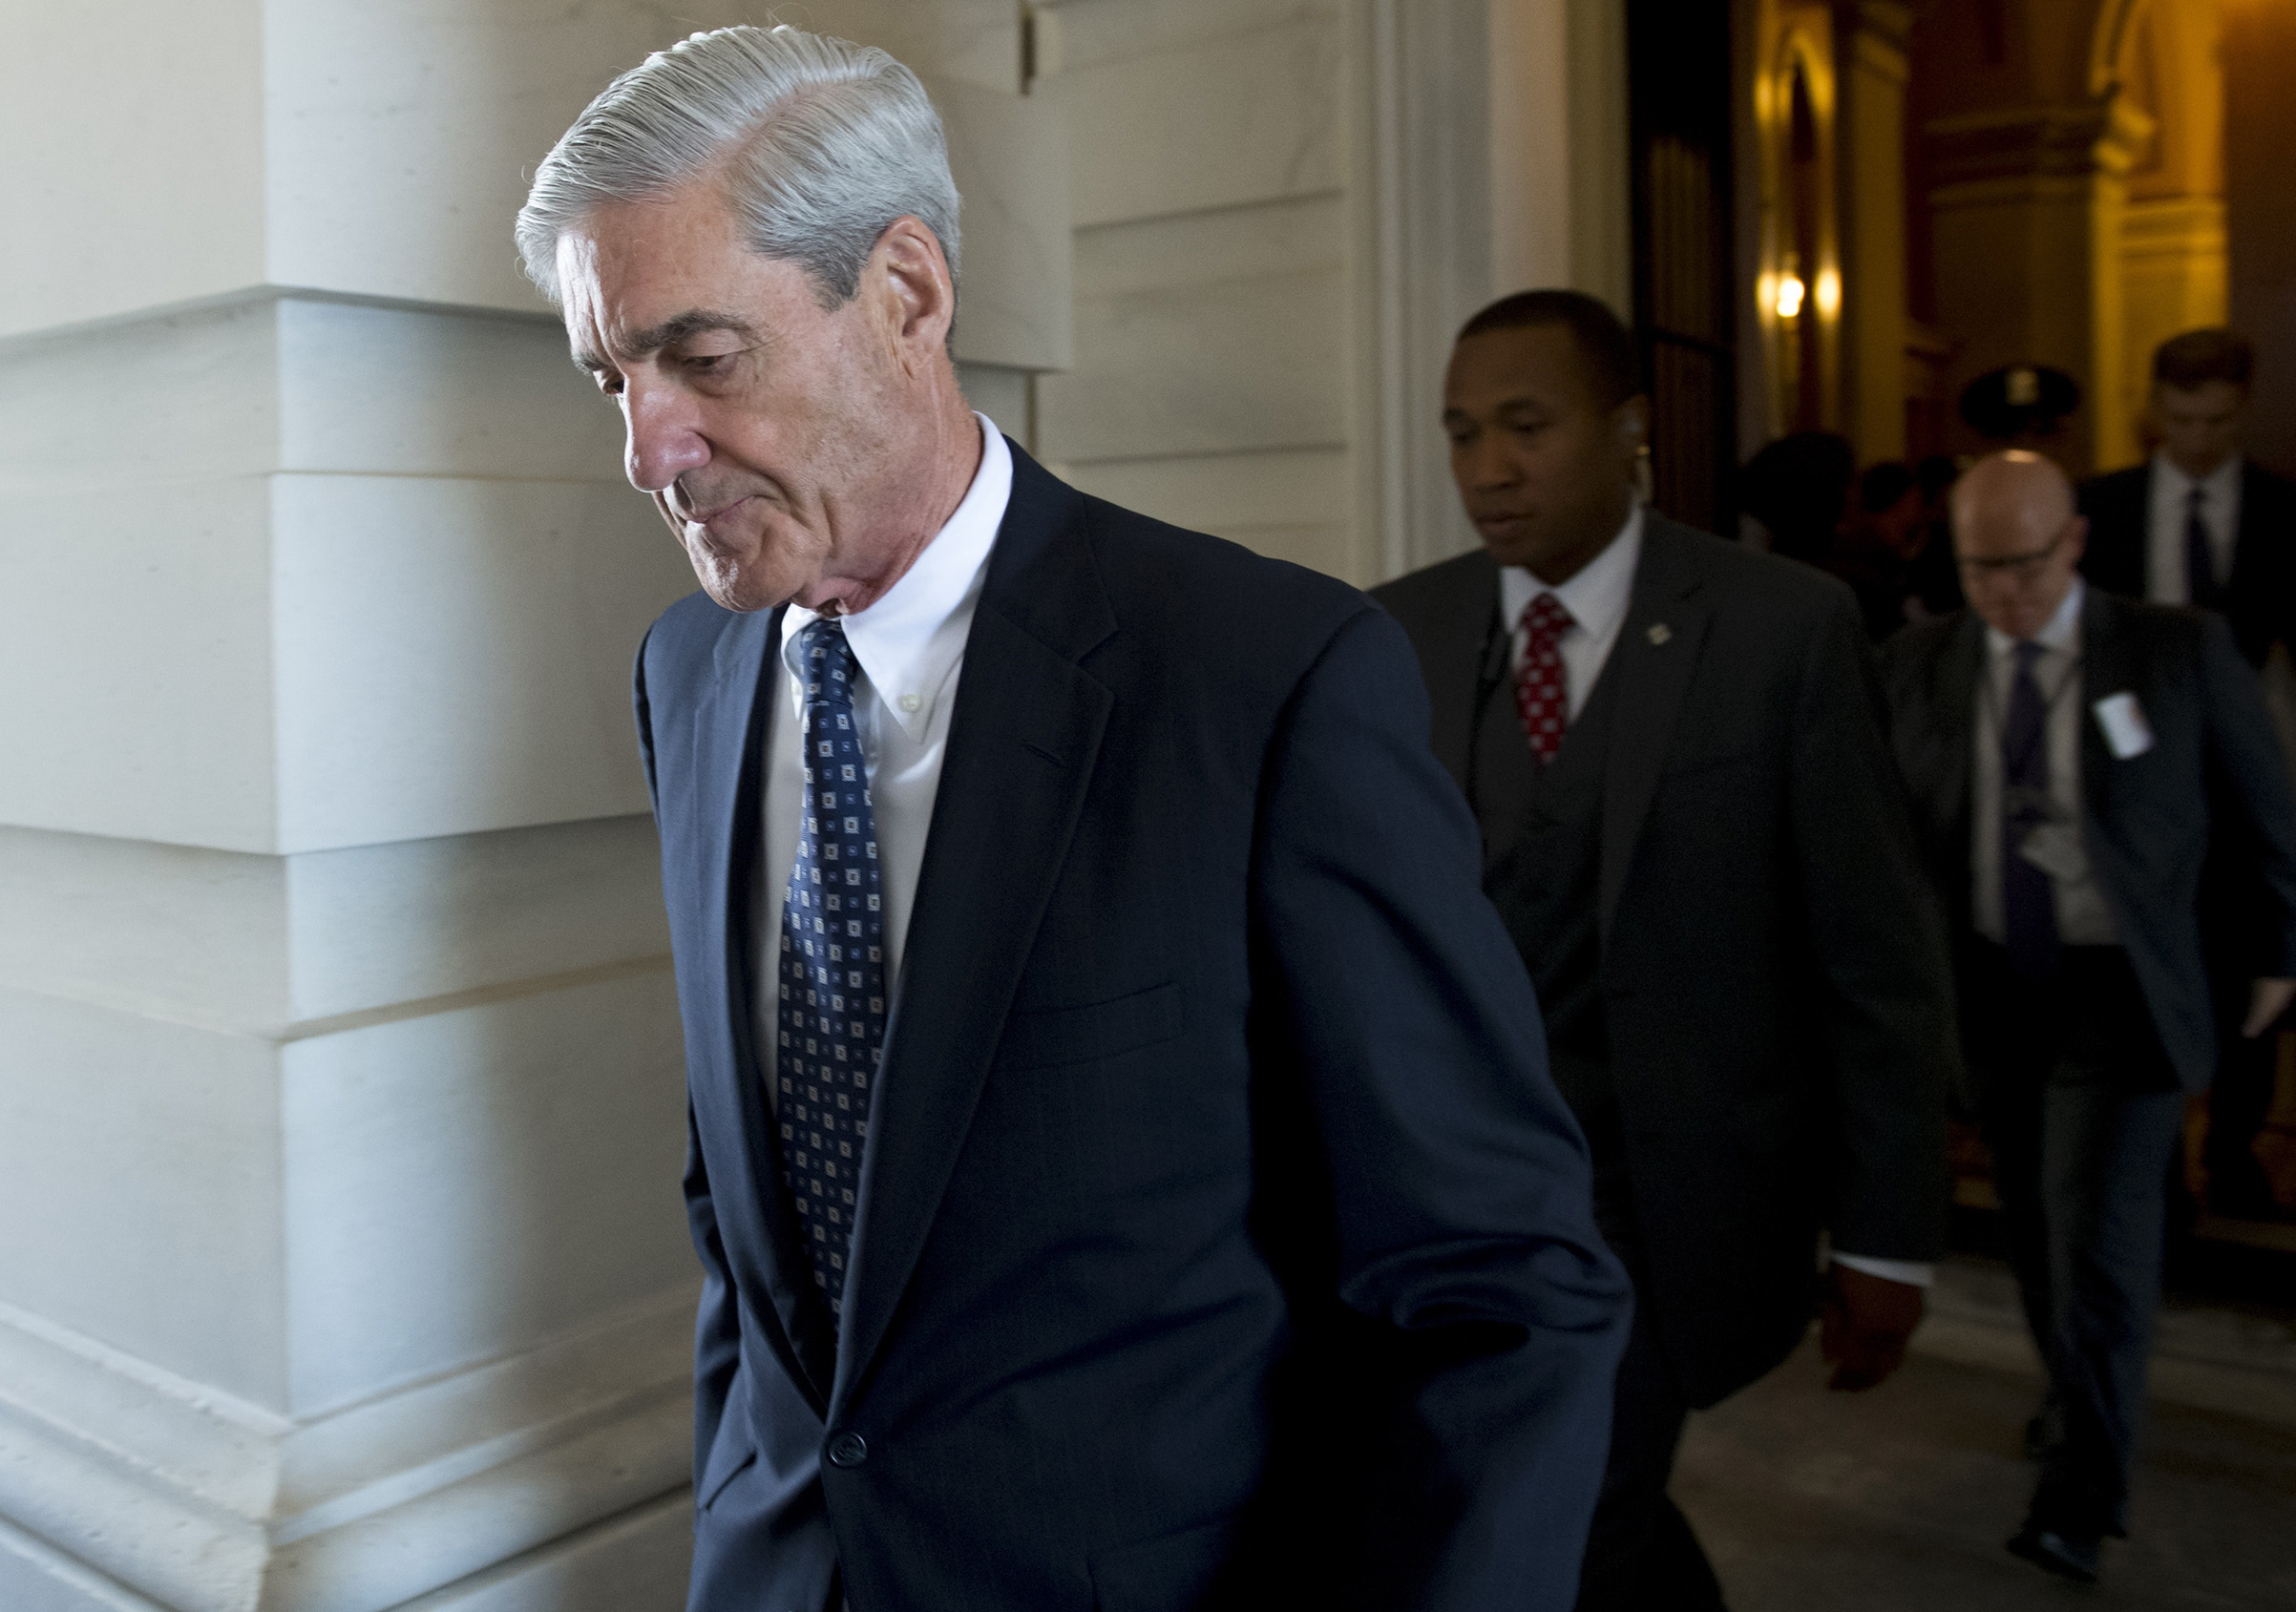 Former FBI Director Robert Mueller, special counsel on the Russian investigation, leaves following a meeting with members of the US Senate Judiciary Committee at the US Capitol in Washington, DC on June 21, 2017. (SAUL LOEB—AFP/Getty Images)